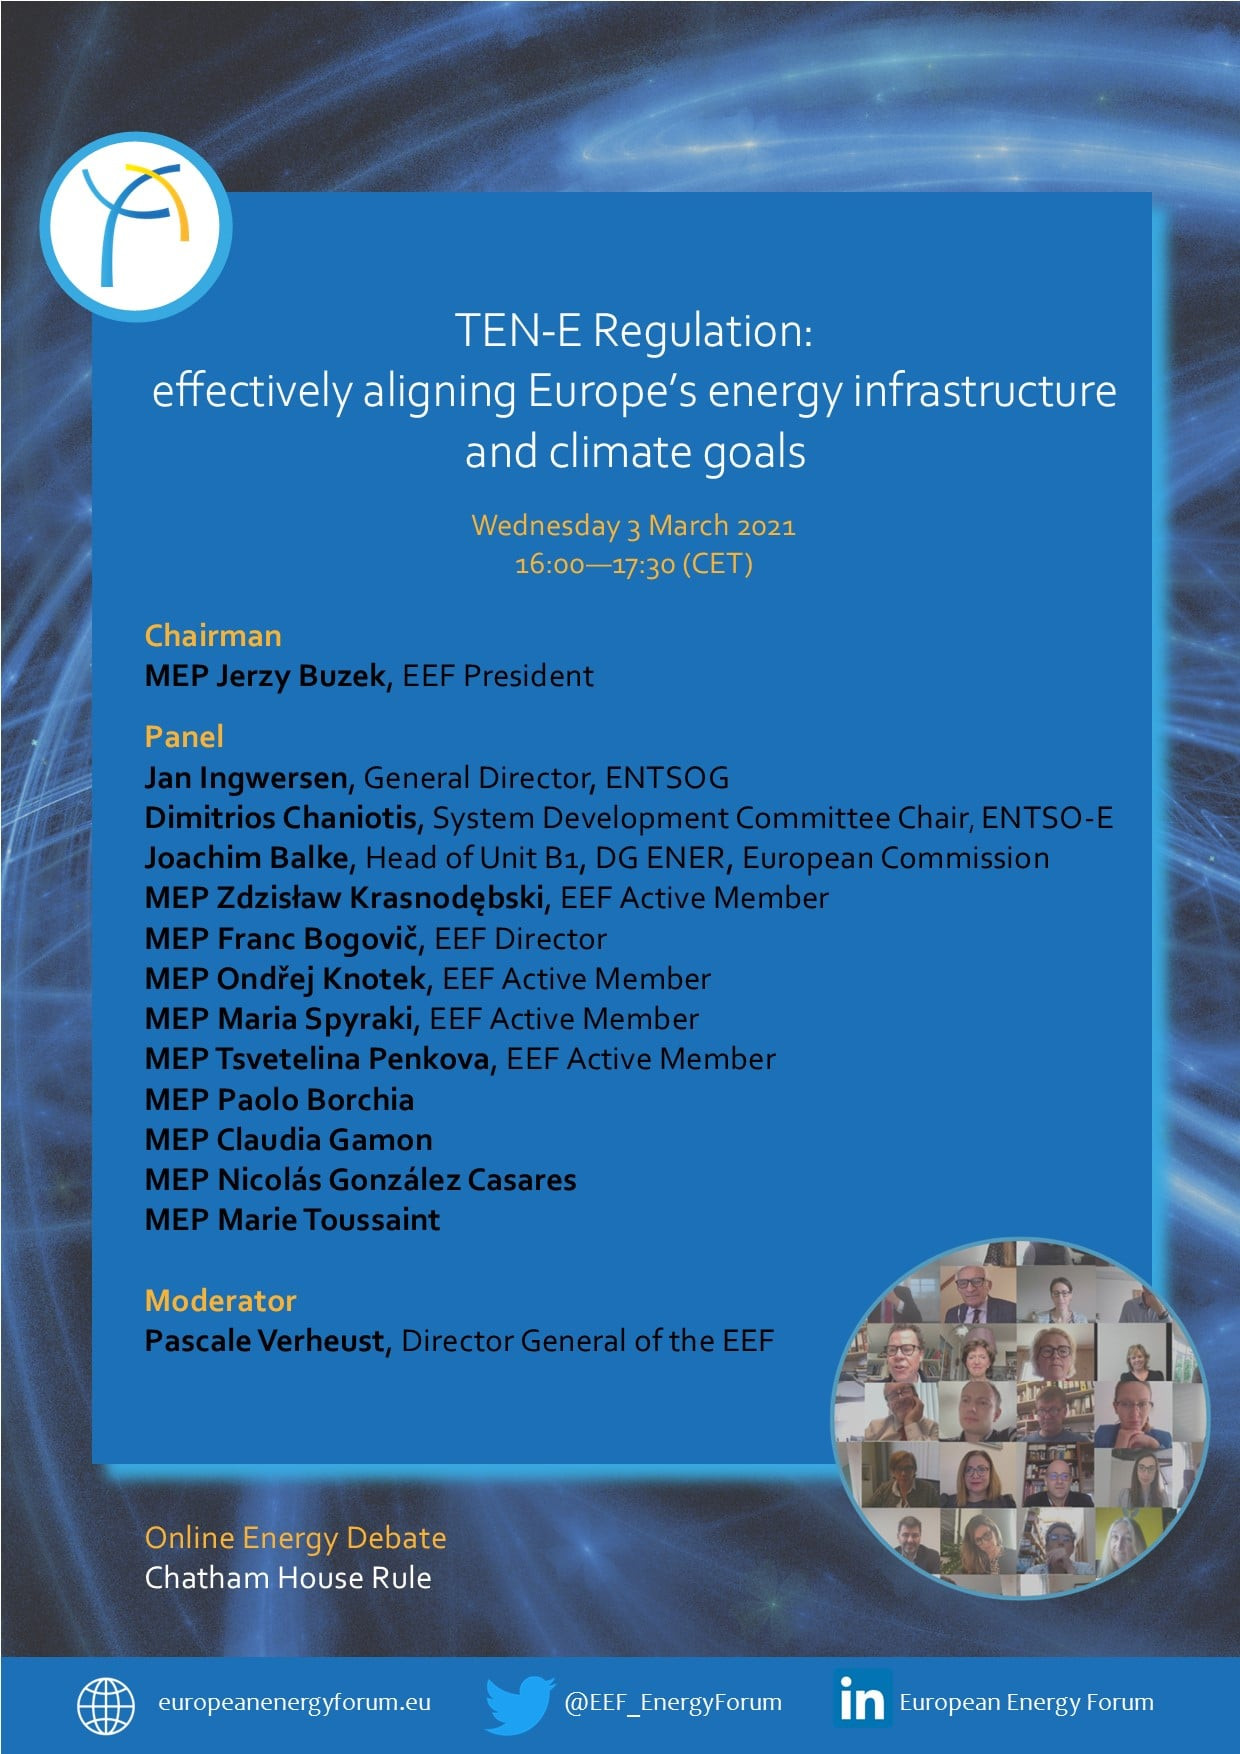 TEN-E Regulation: effectively aligning Europe's energy infrastructure and climate goals.